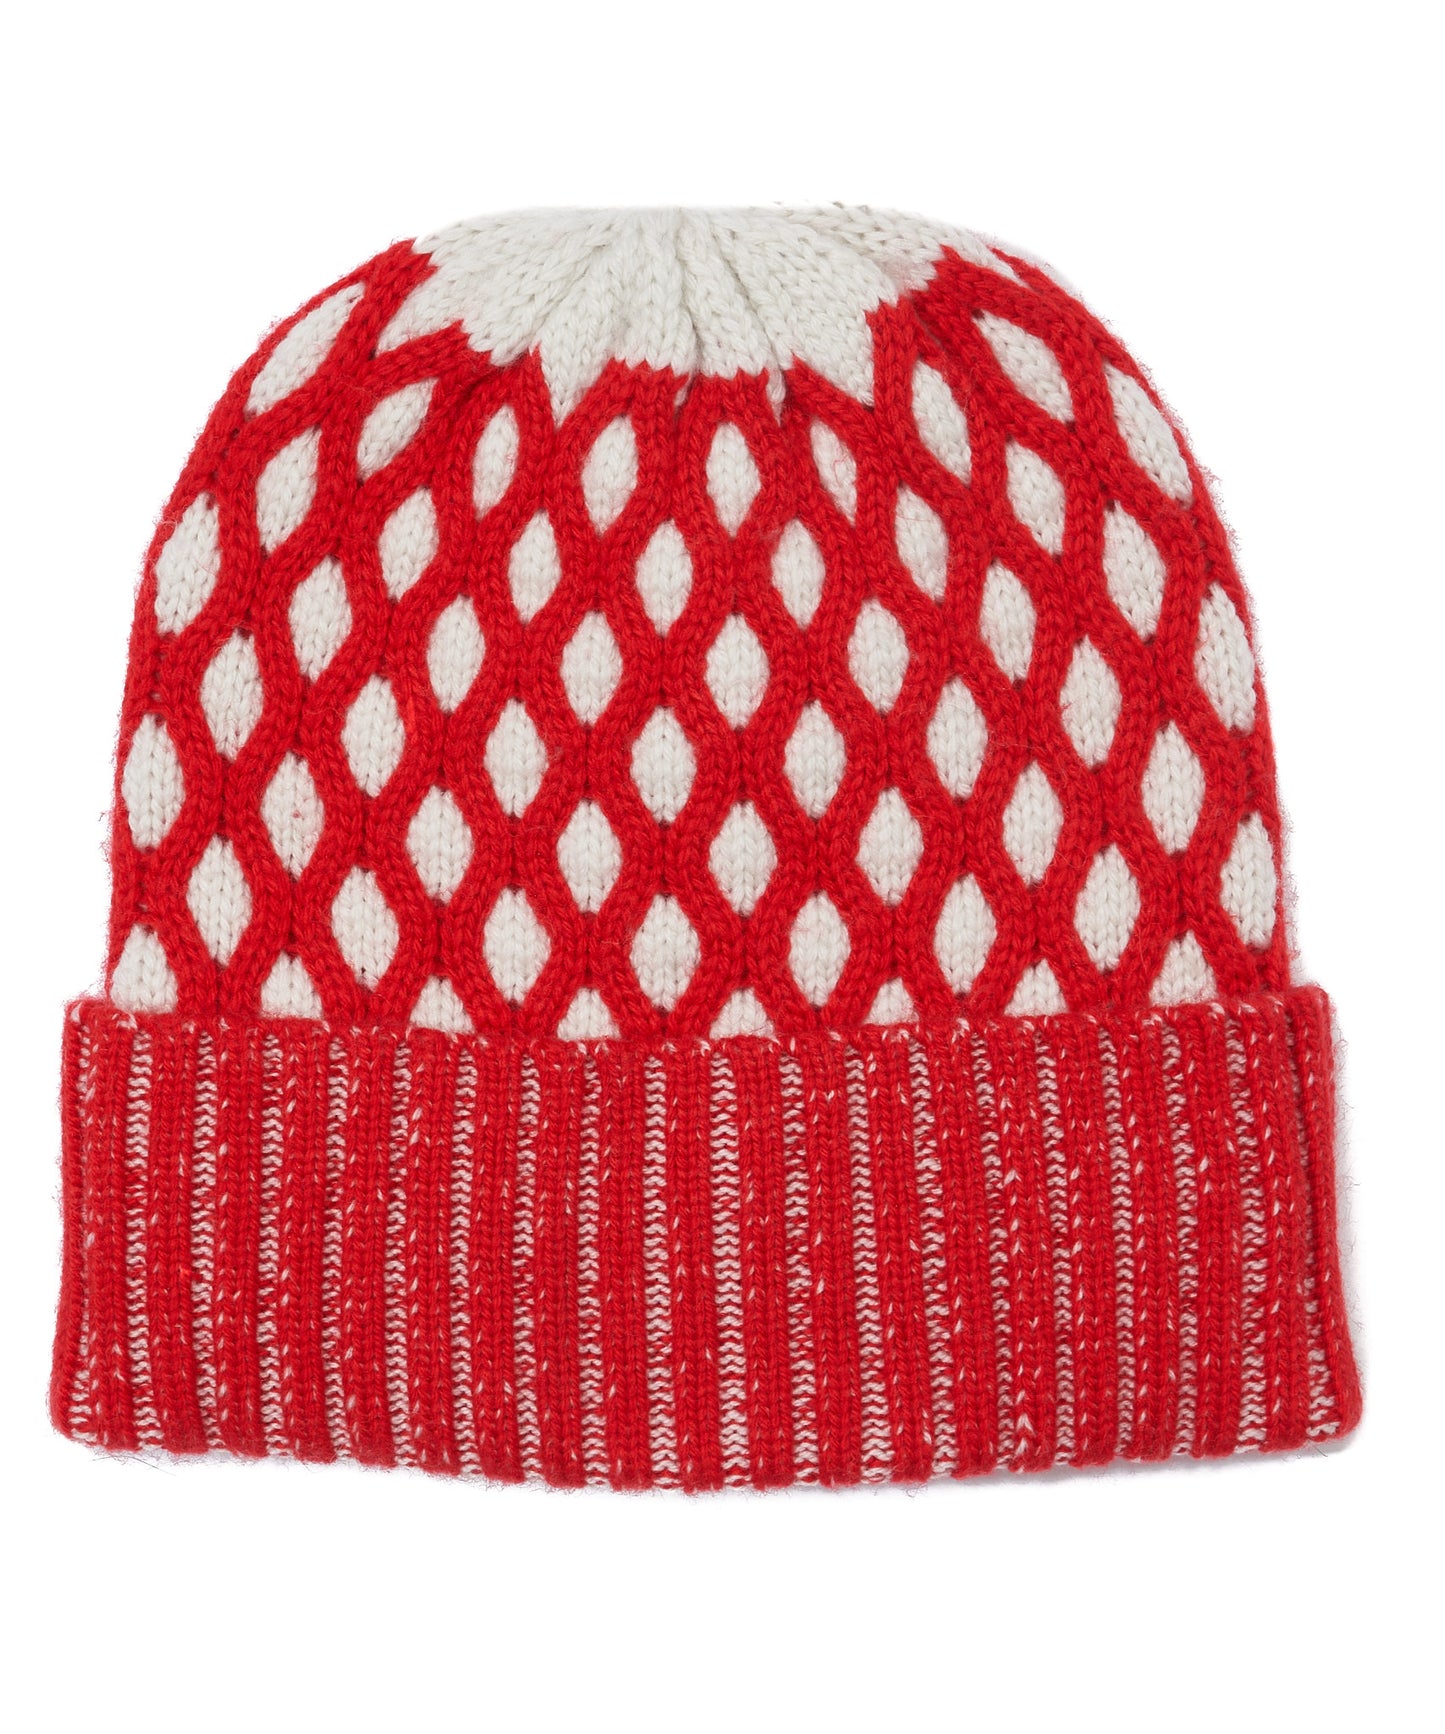 Recycled Bi-color Honeycomb Beanie in color Ivory